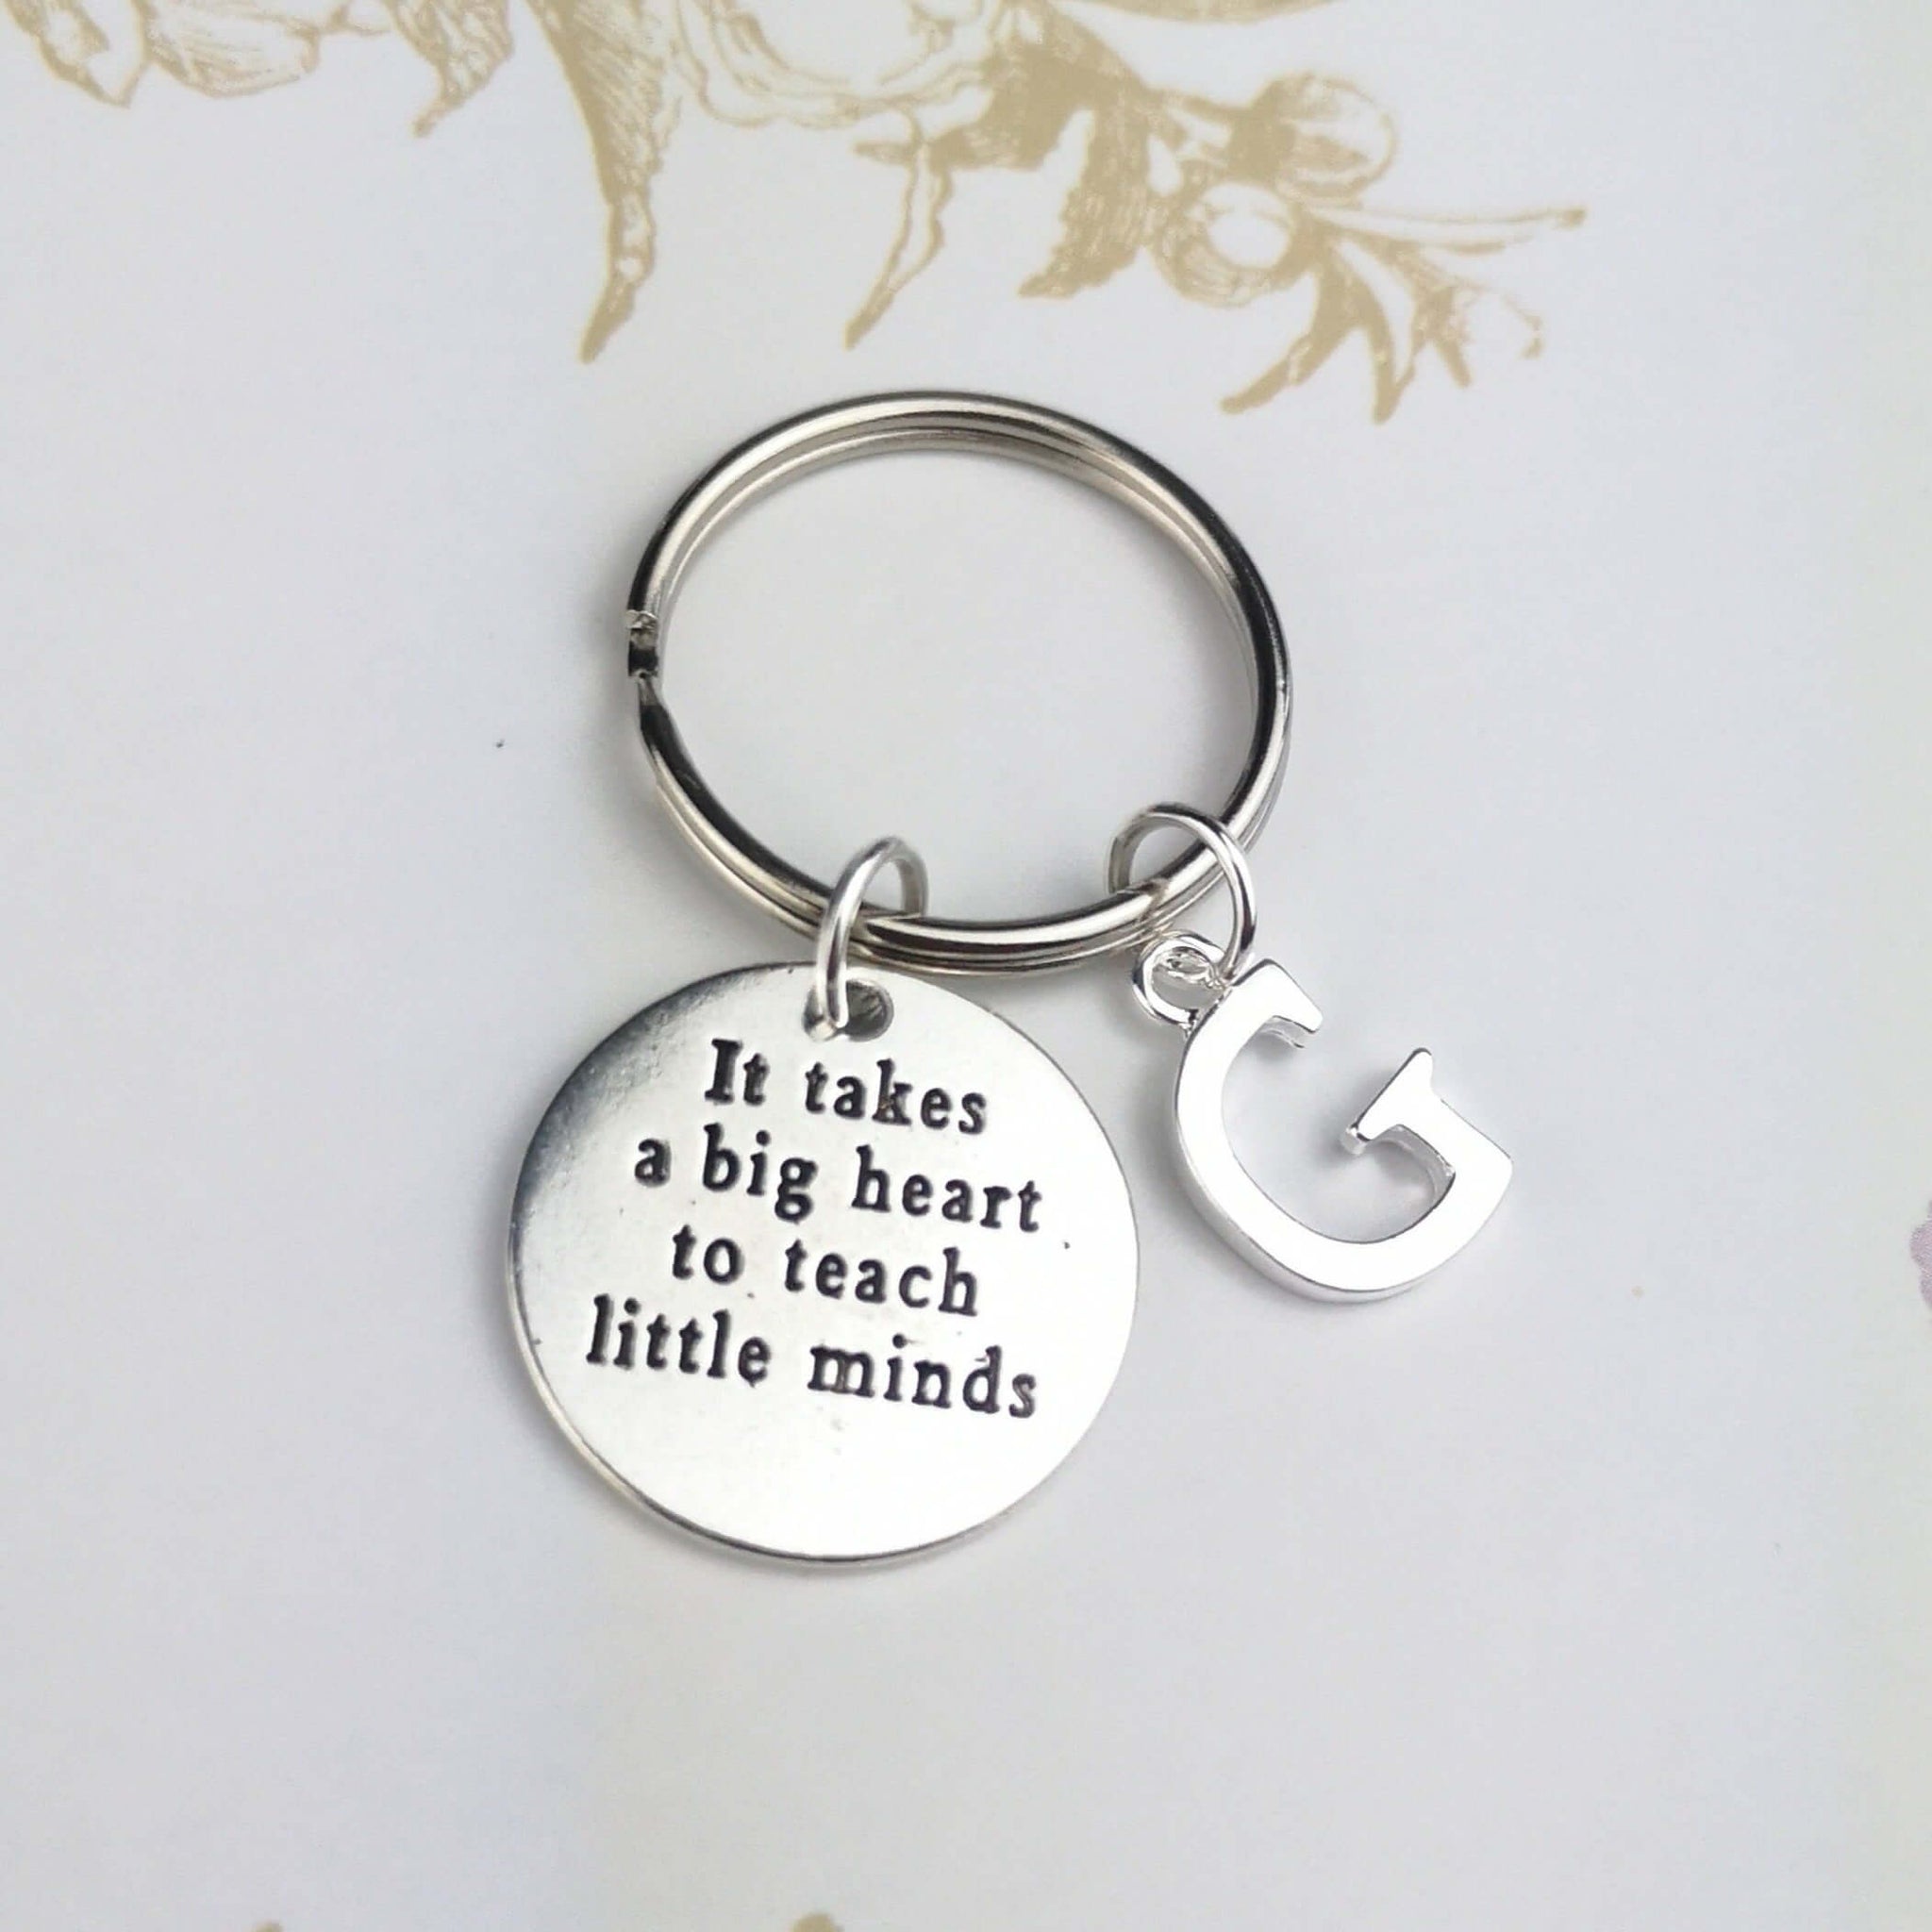 it takes a big heart to teach little minds. Teacher gift personalised keyring